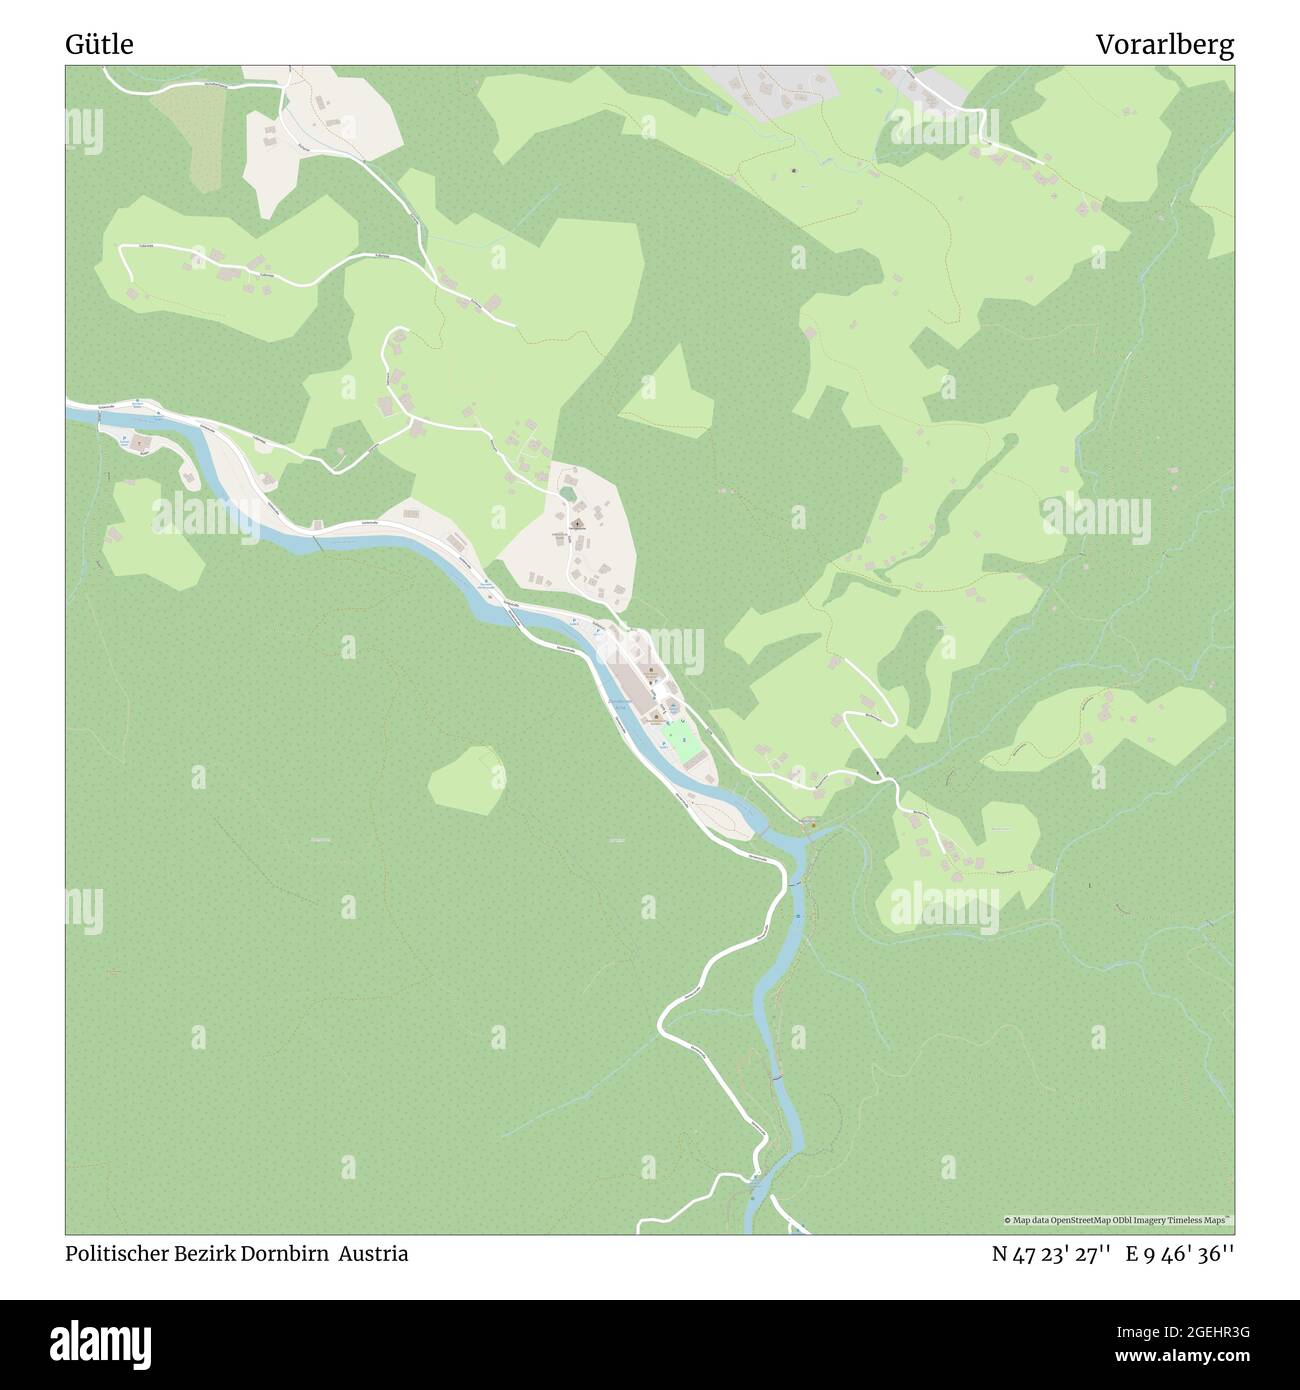 Gütle, Politischer Bezirk Dornbirn, Austria, Vorarlberg, N 47 23' 27'', E 9 46' 36'', map, Timeless Map published in 2021. Travelers, explorers and adventurers like Florence Nightingale, David Livingstone, Ernest Shackleton, Lewis and Clark and Sherlock Holmes relied on maps to plan travels to the world's most remote corners, Timeless Maps is mapping most locations on the globe, showing the achievement of great dreams Stock Photo